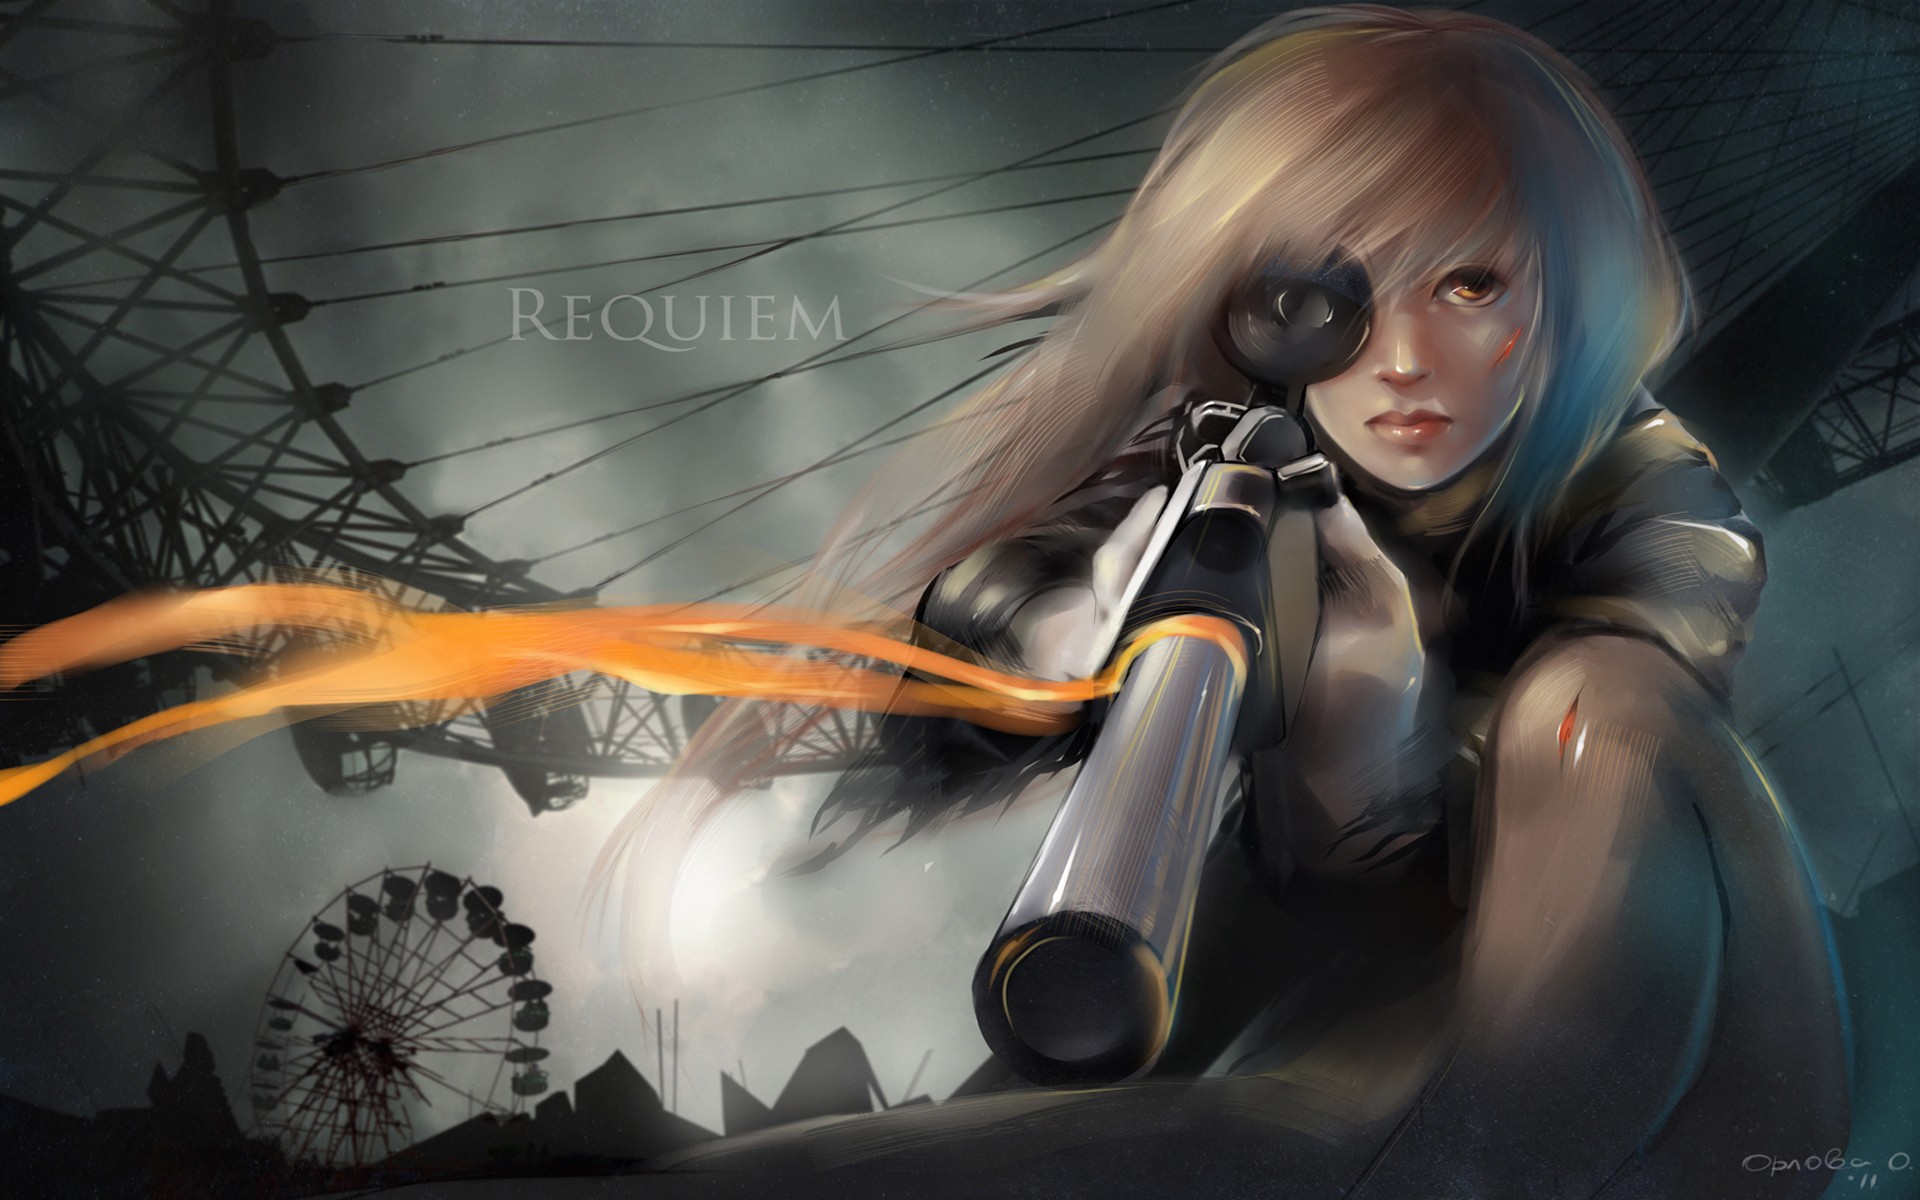 blondes, Guns, Sniper, Weapons, Requiem, For, The, Phantom, Drawings, Madness, Anime, Girls, Sheer, Clothing, Sniper, Elite Wallpaper